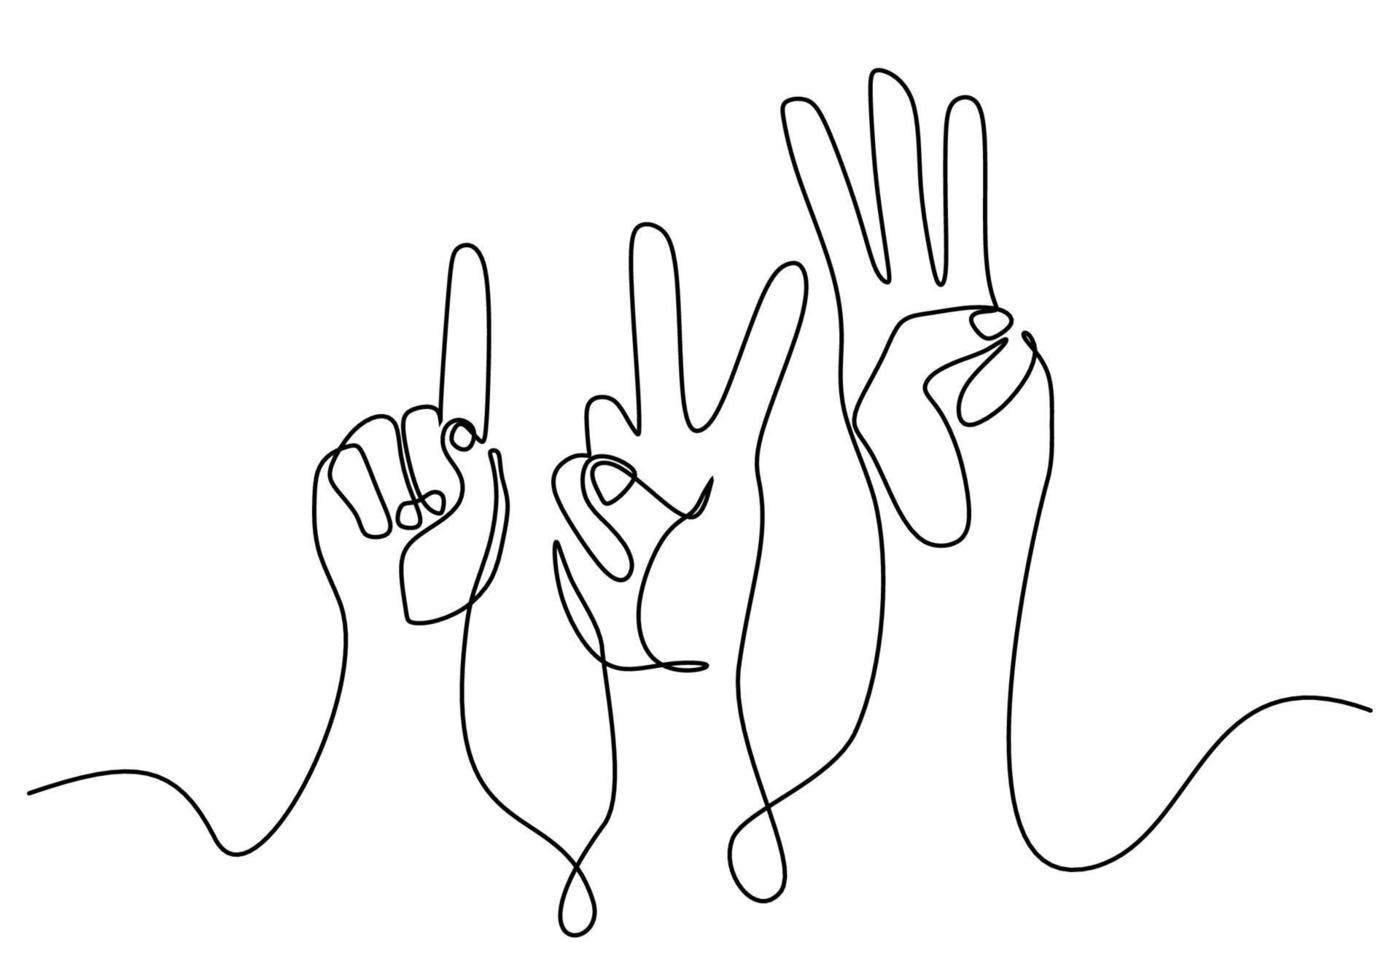 One continuous single line of hand diversity pose on white background. vector